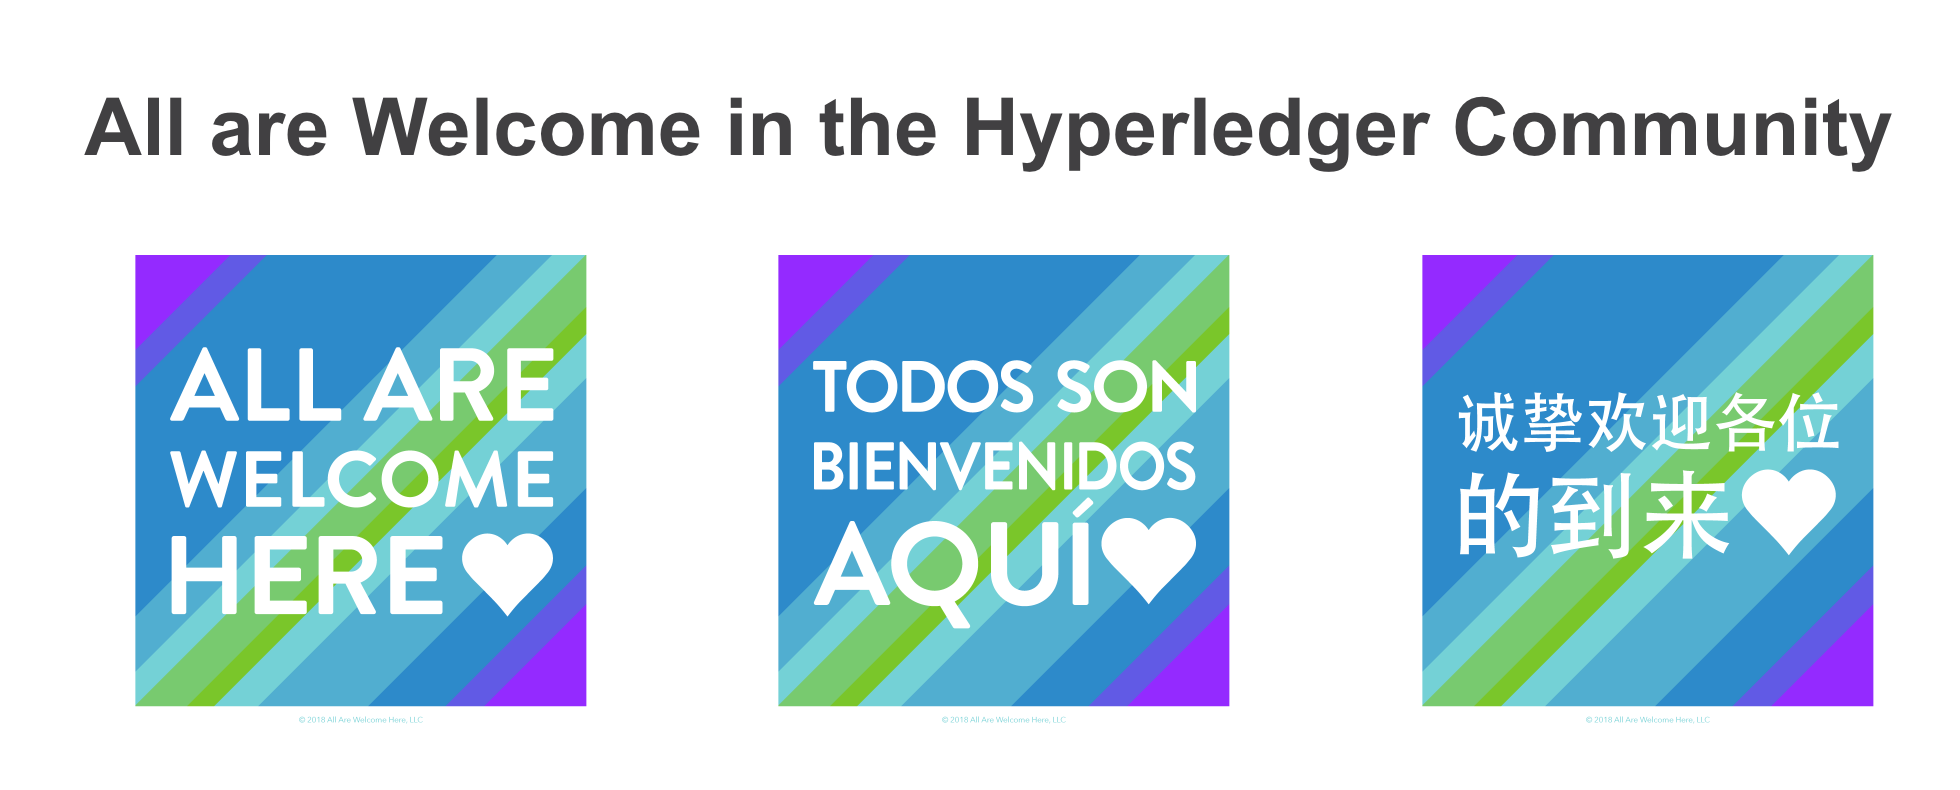 All are Welcome in the Hyperledger Community